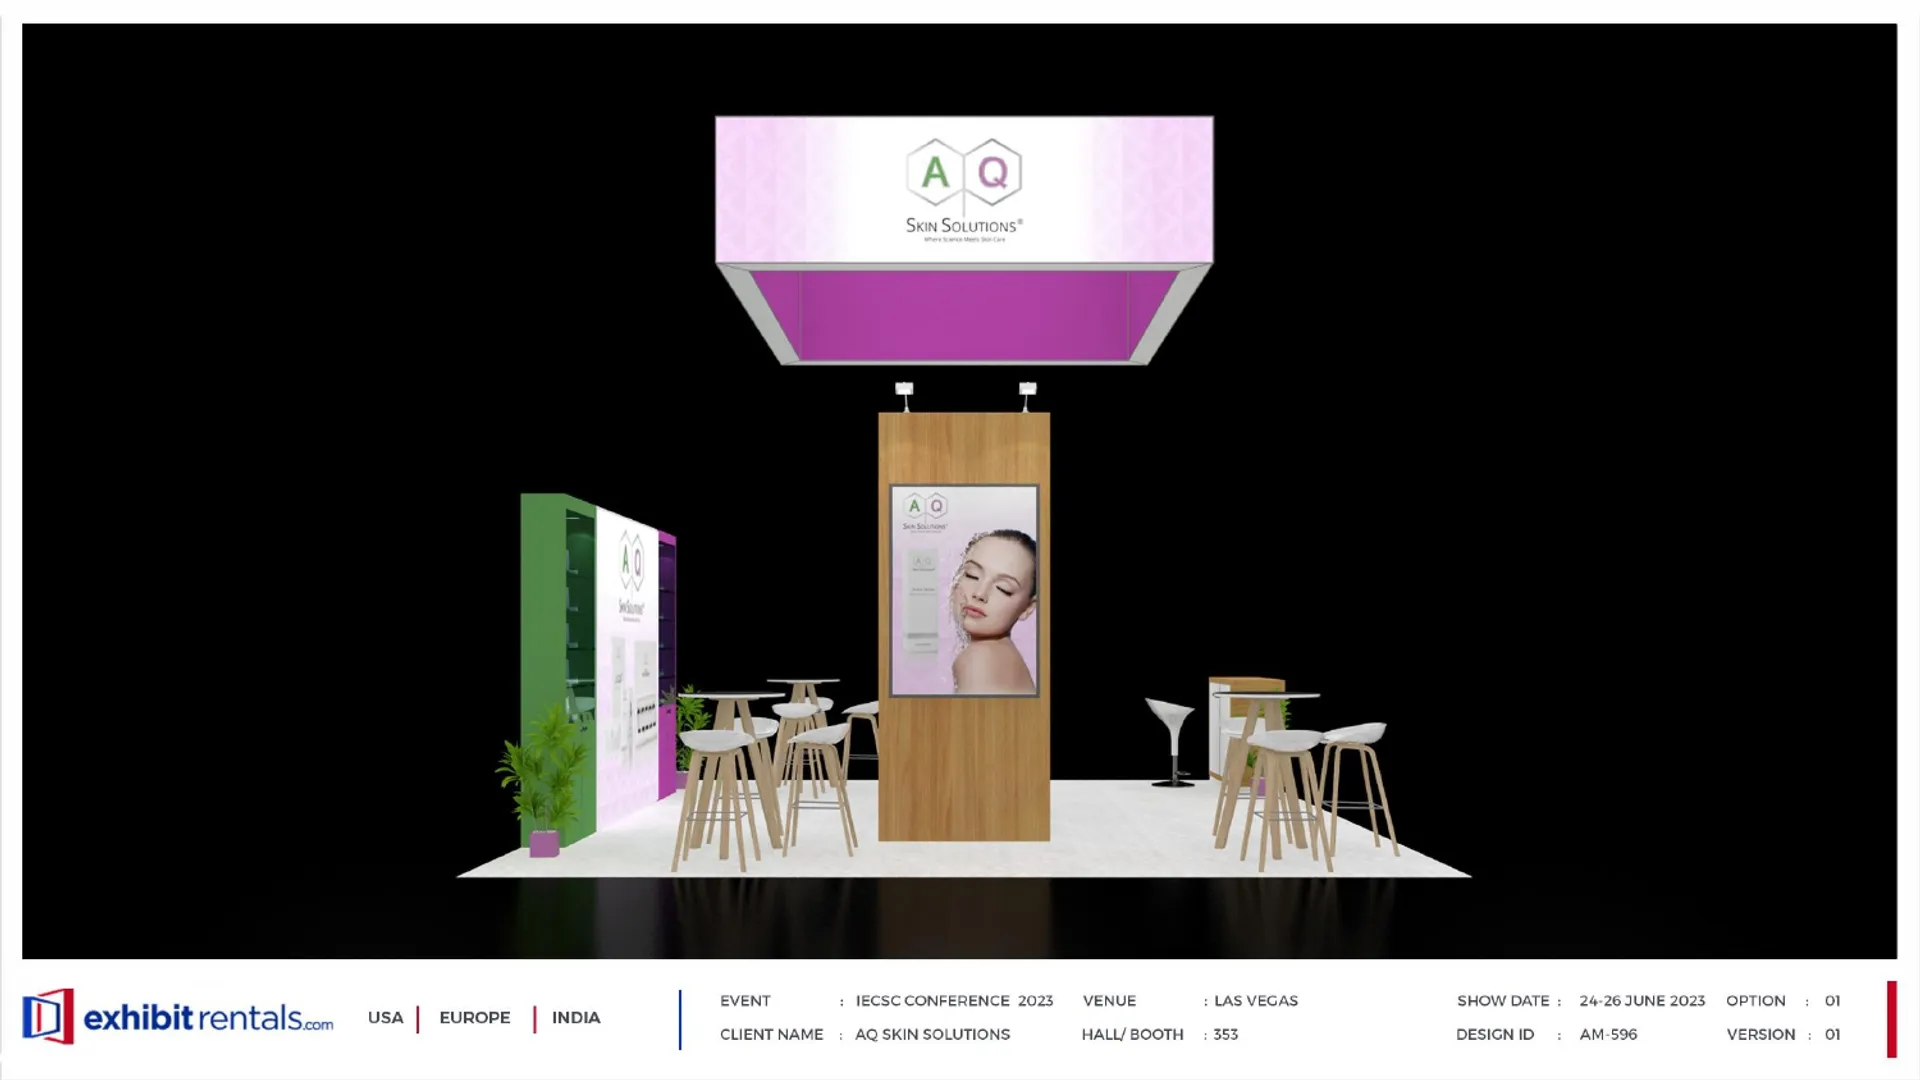 booth-design-projects/Exhibit-Rentals/2024-04-18-20x20-ISLAND-Project-85/1.1_AQ Skin Solutions_IECSC Conference_ER design proposal -16_page-0001-g9ngpd.jpg